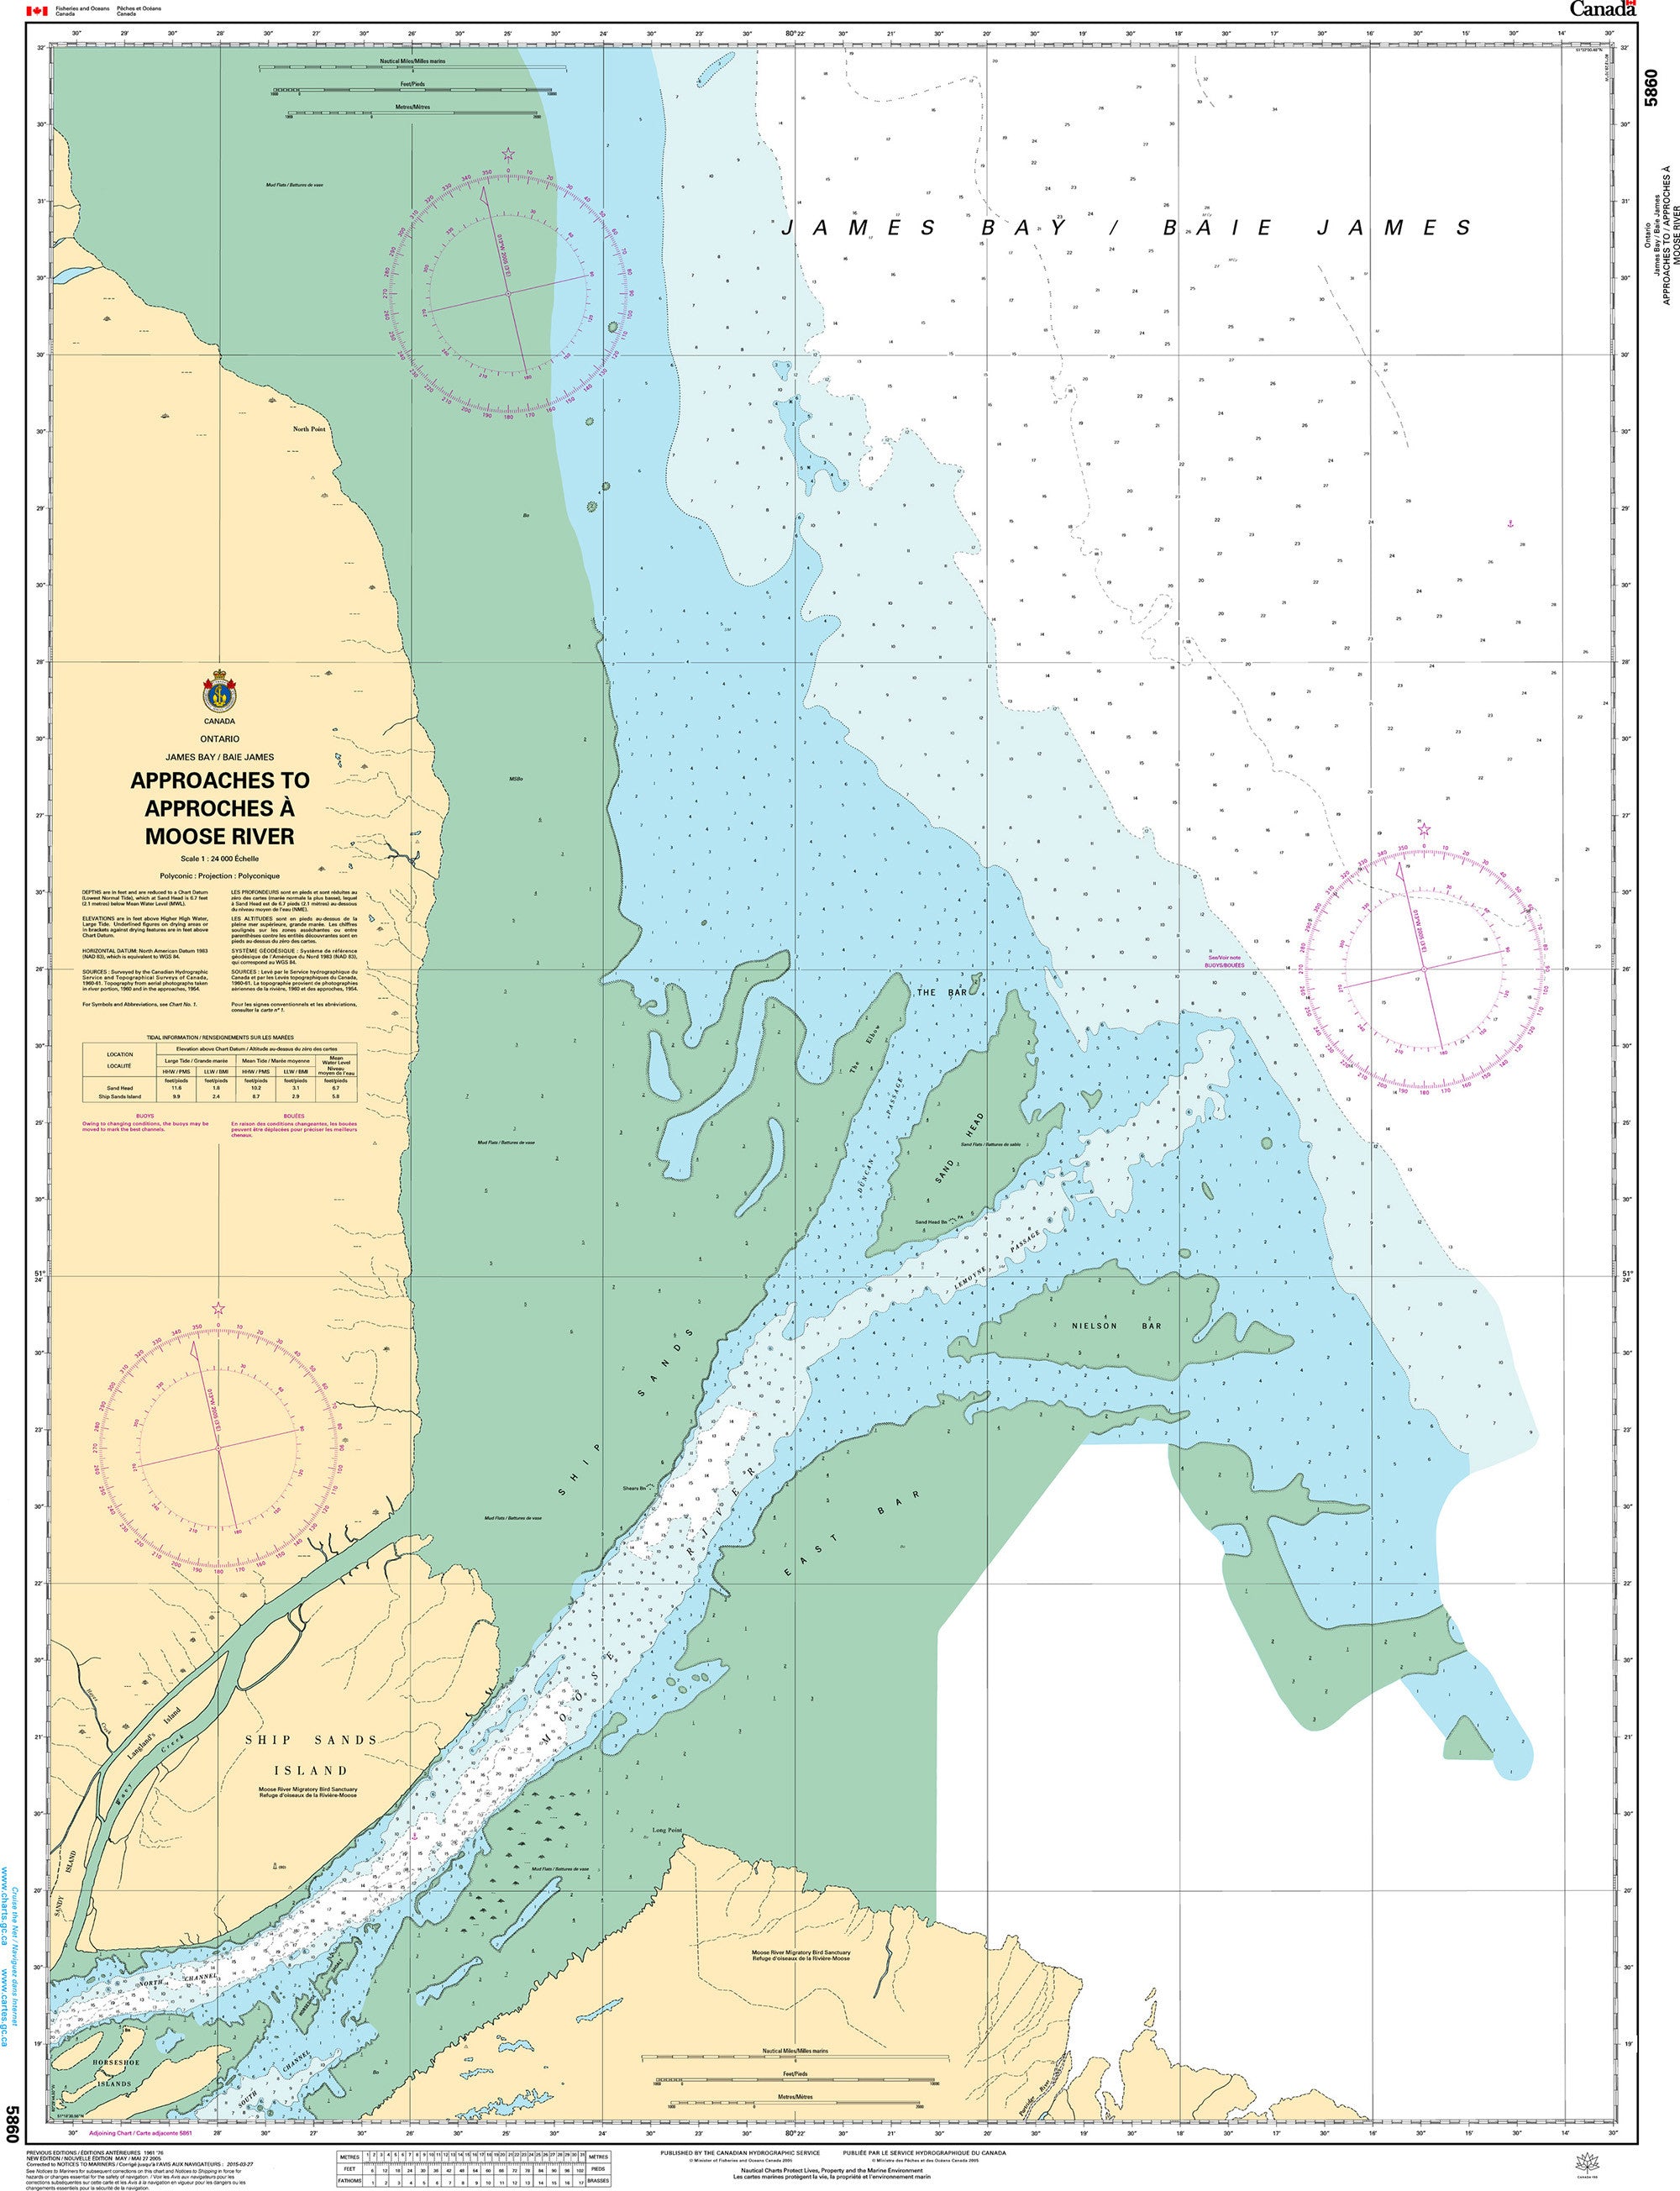 Canadian Hydrographic Service Nautical Chart CHS5860: Approaches to/Approches à Moose River